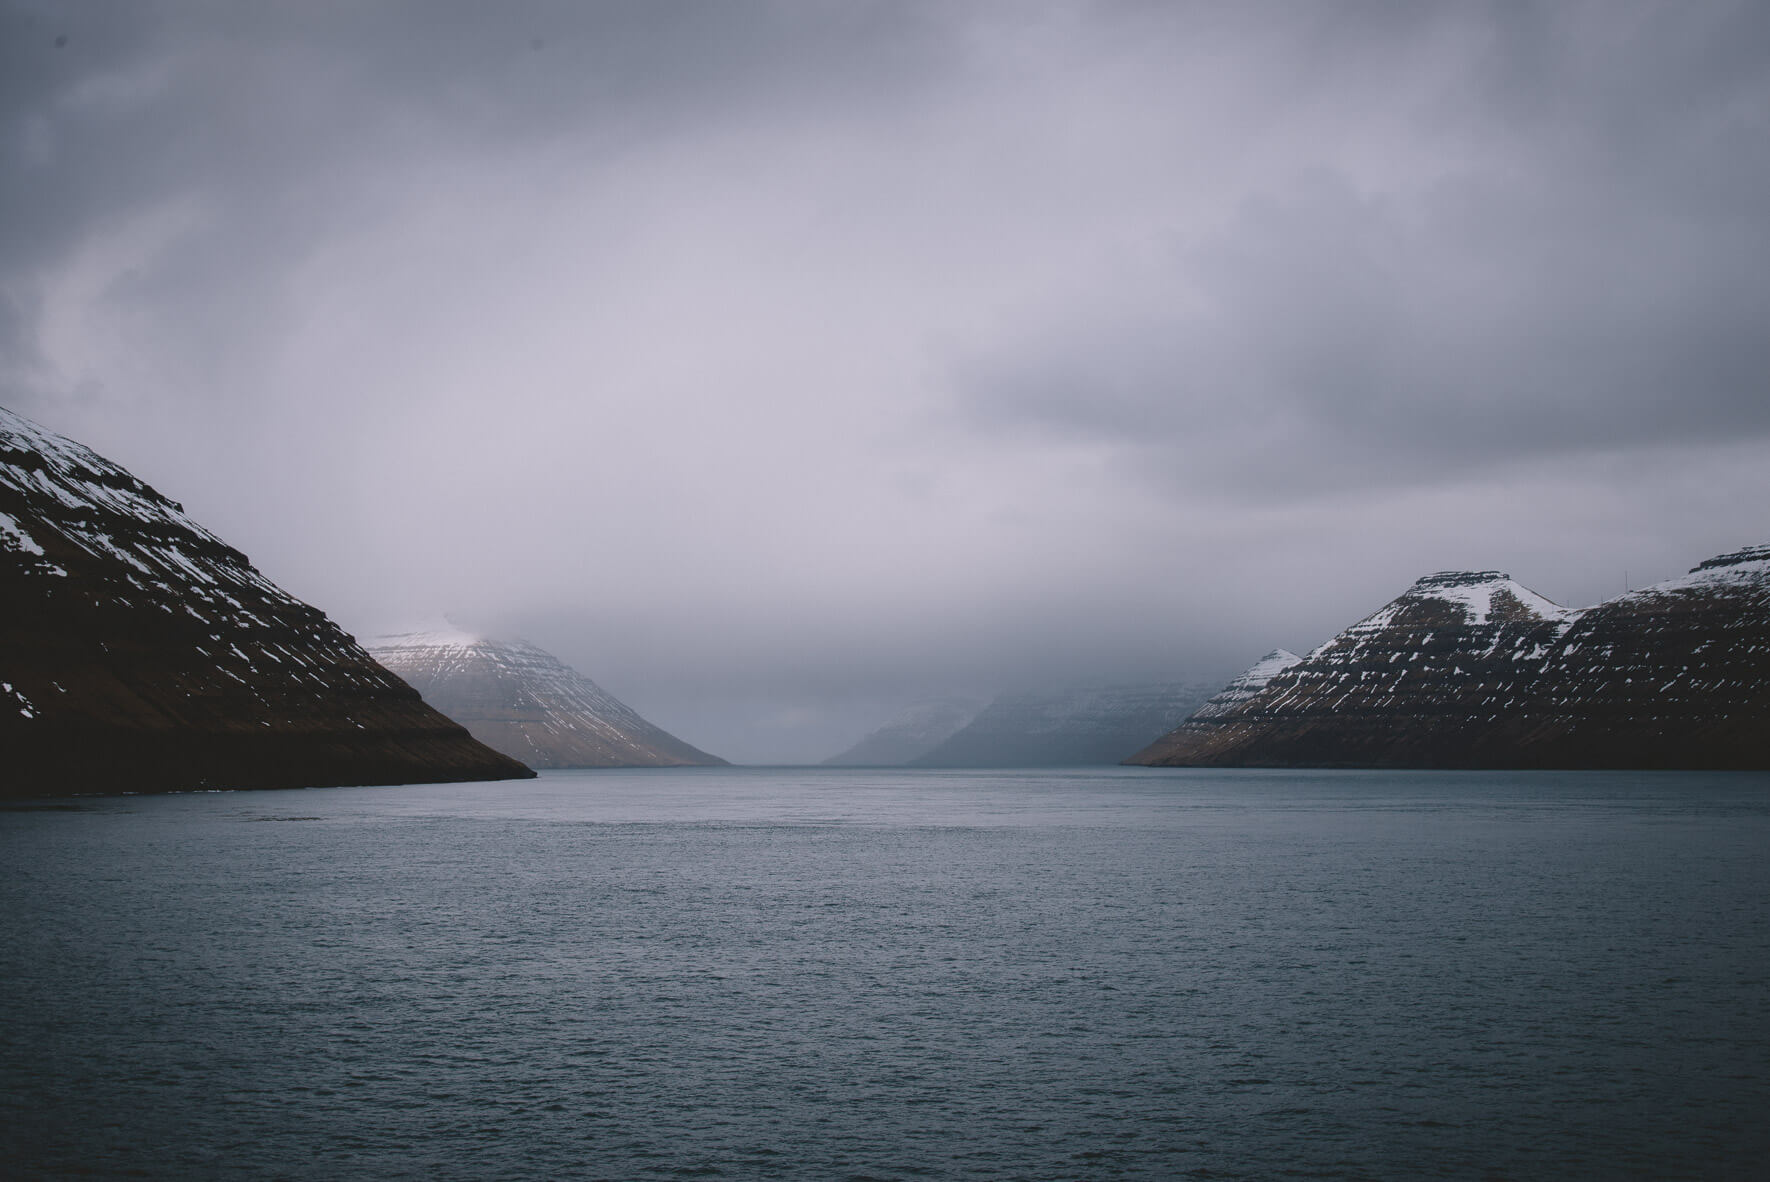 The mountains of the Faroe Islands in Winter